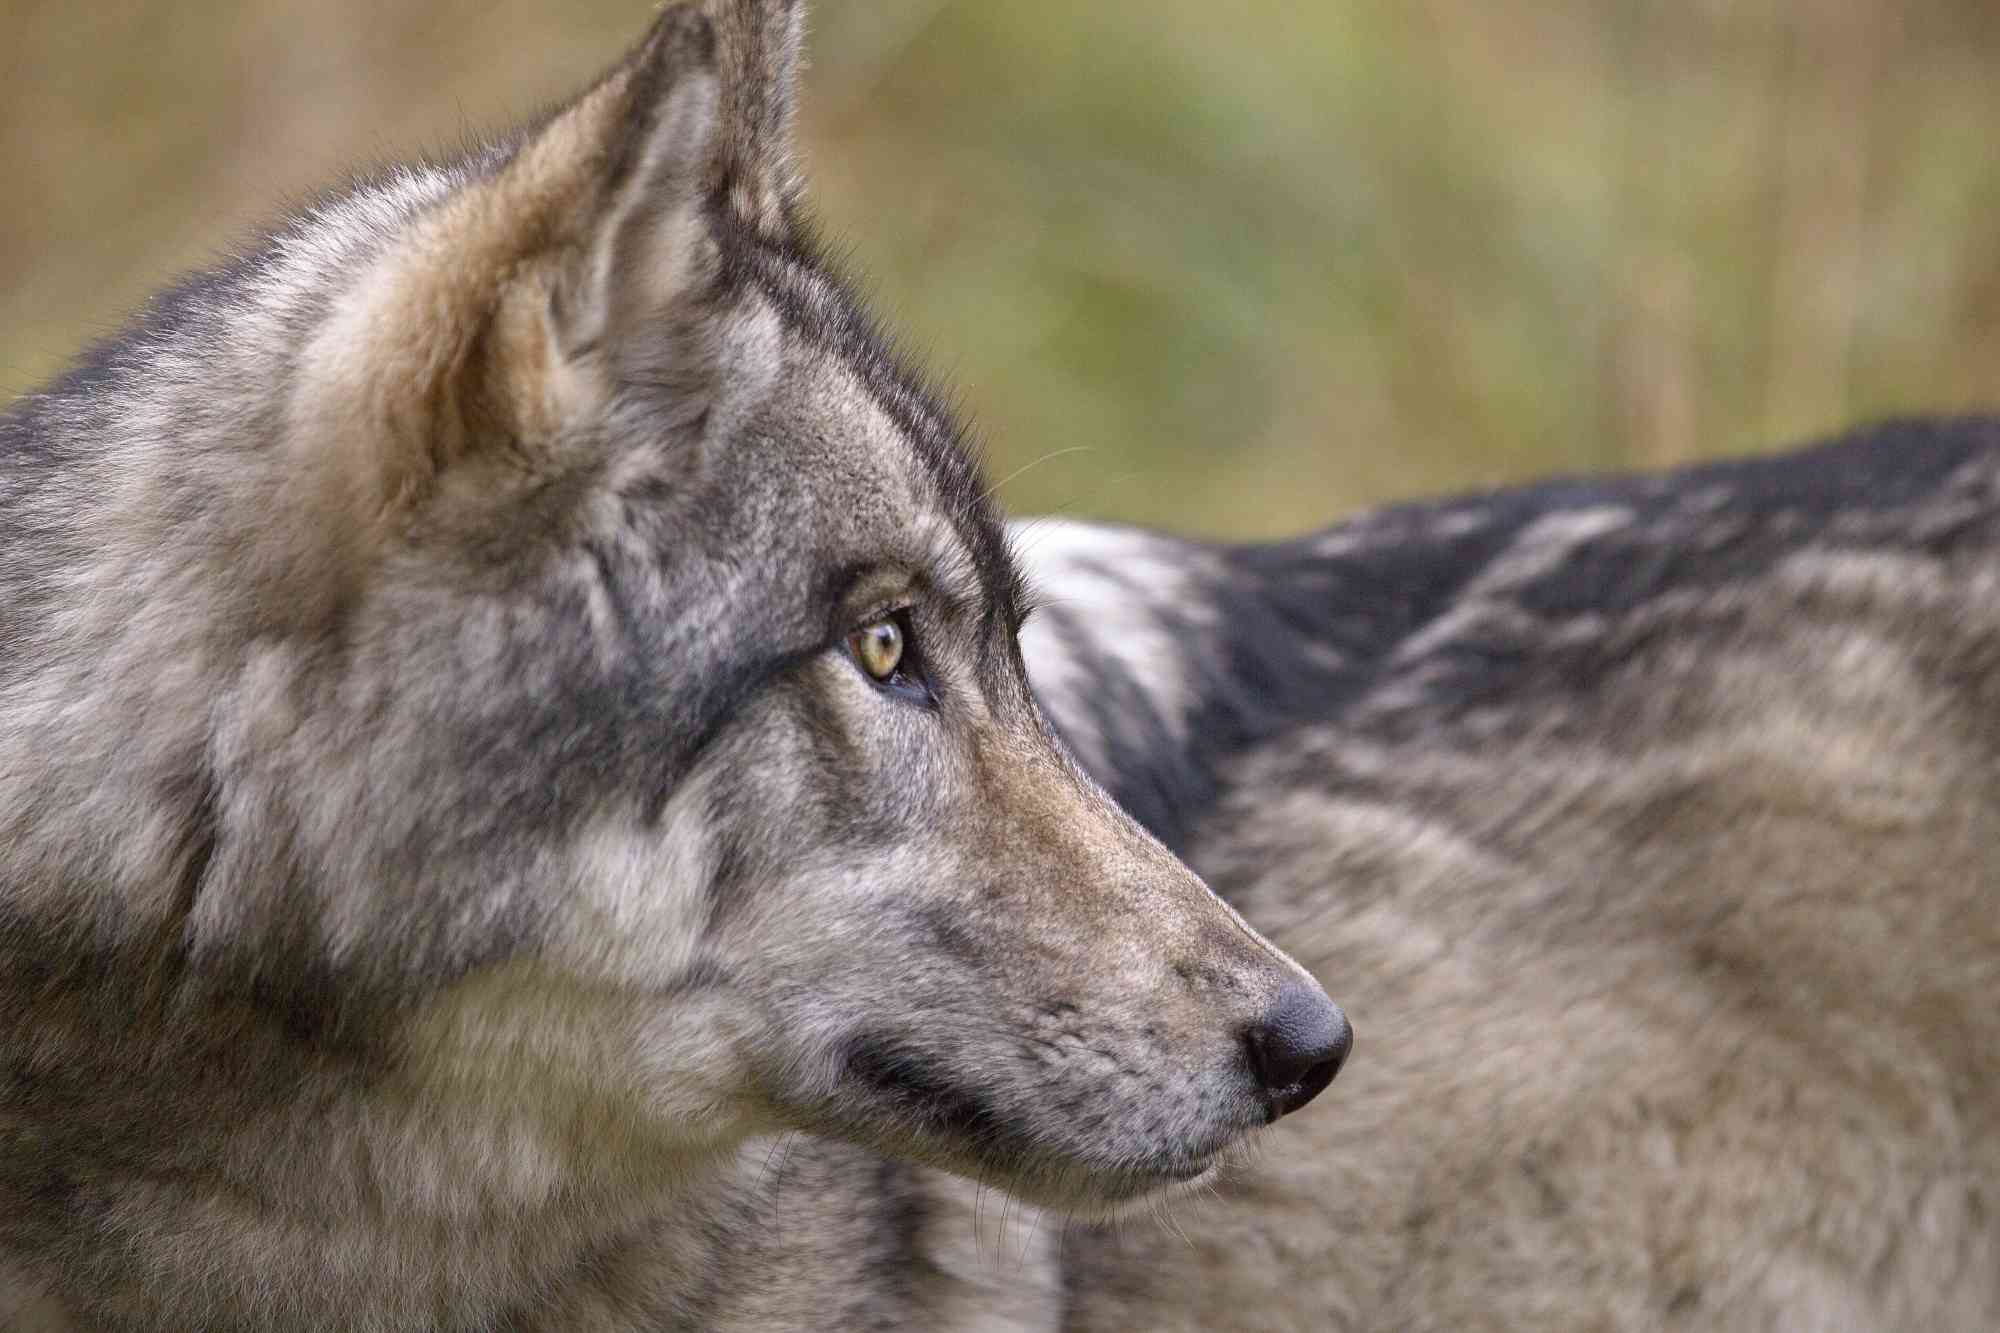 DID YOU KNOW? Wolves are an essential keystone species. - Living with Wolves